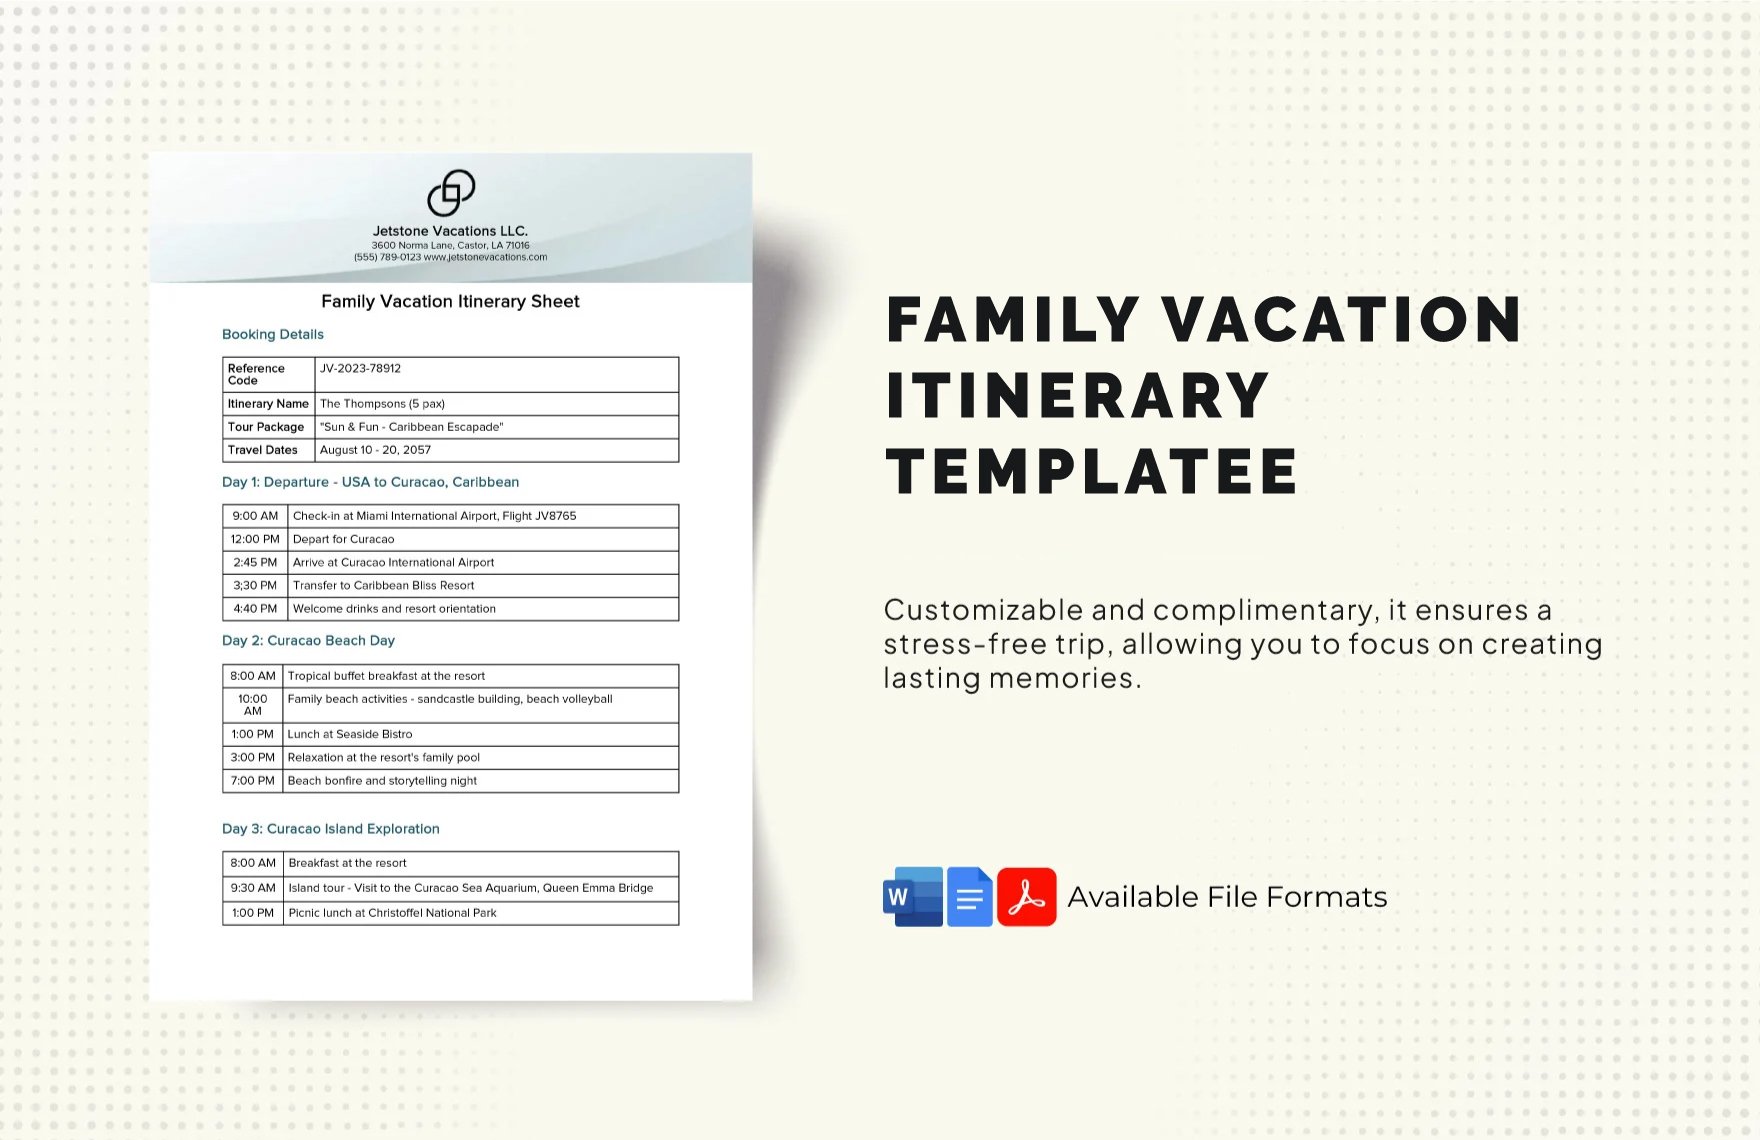 Free Family Vacation Itinerary Template in Word, Google Docs, PDF